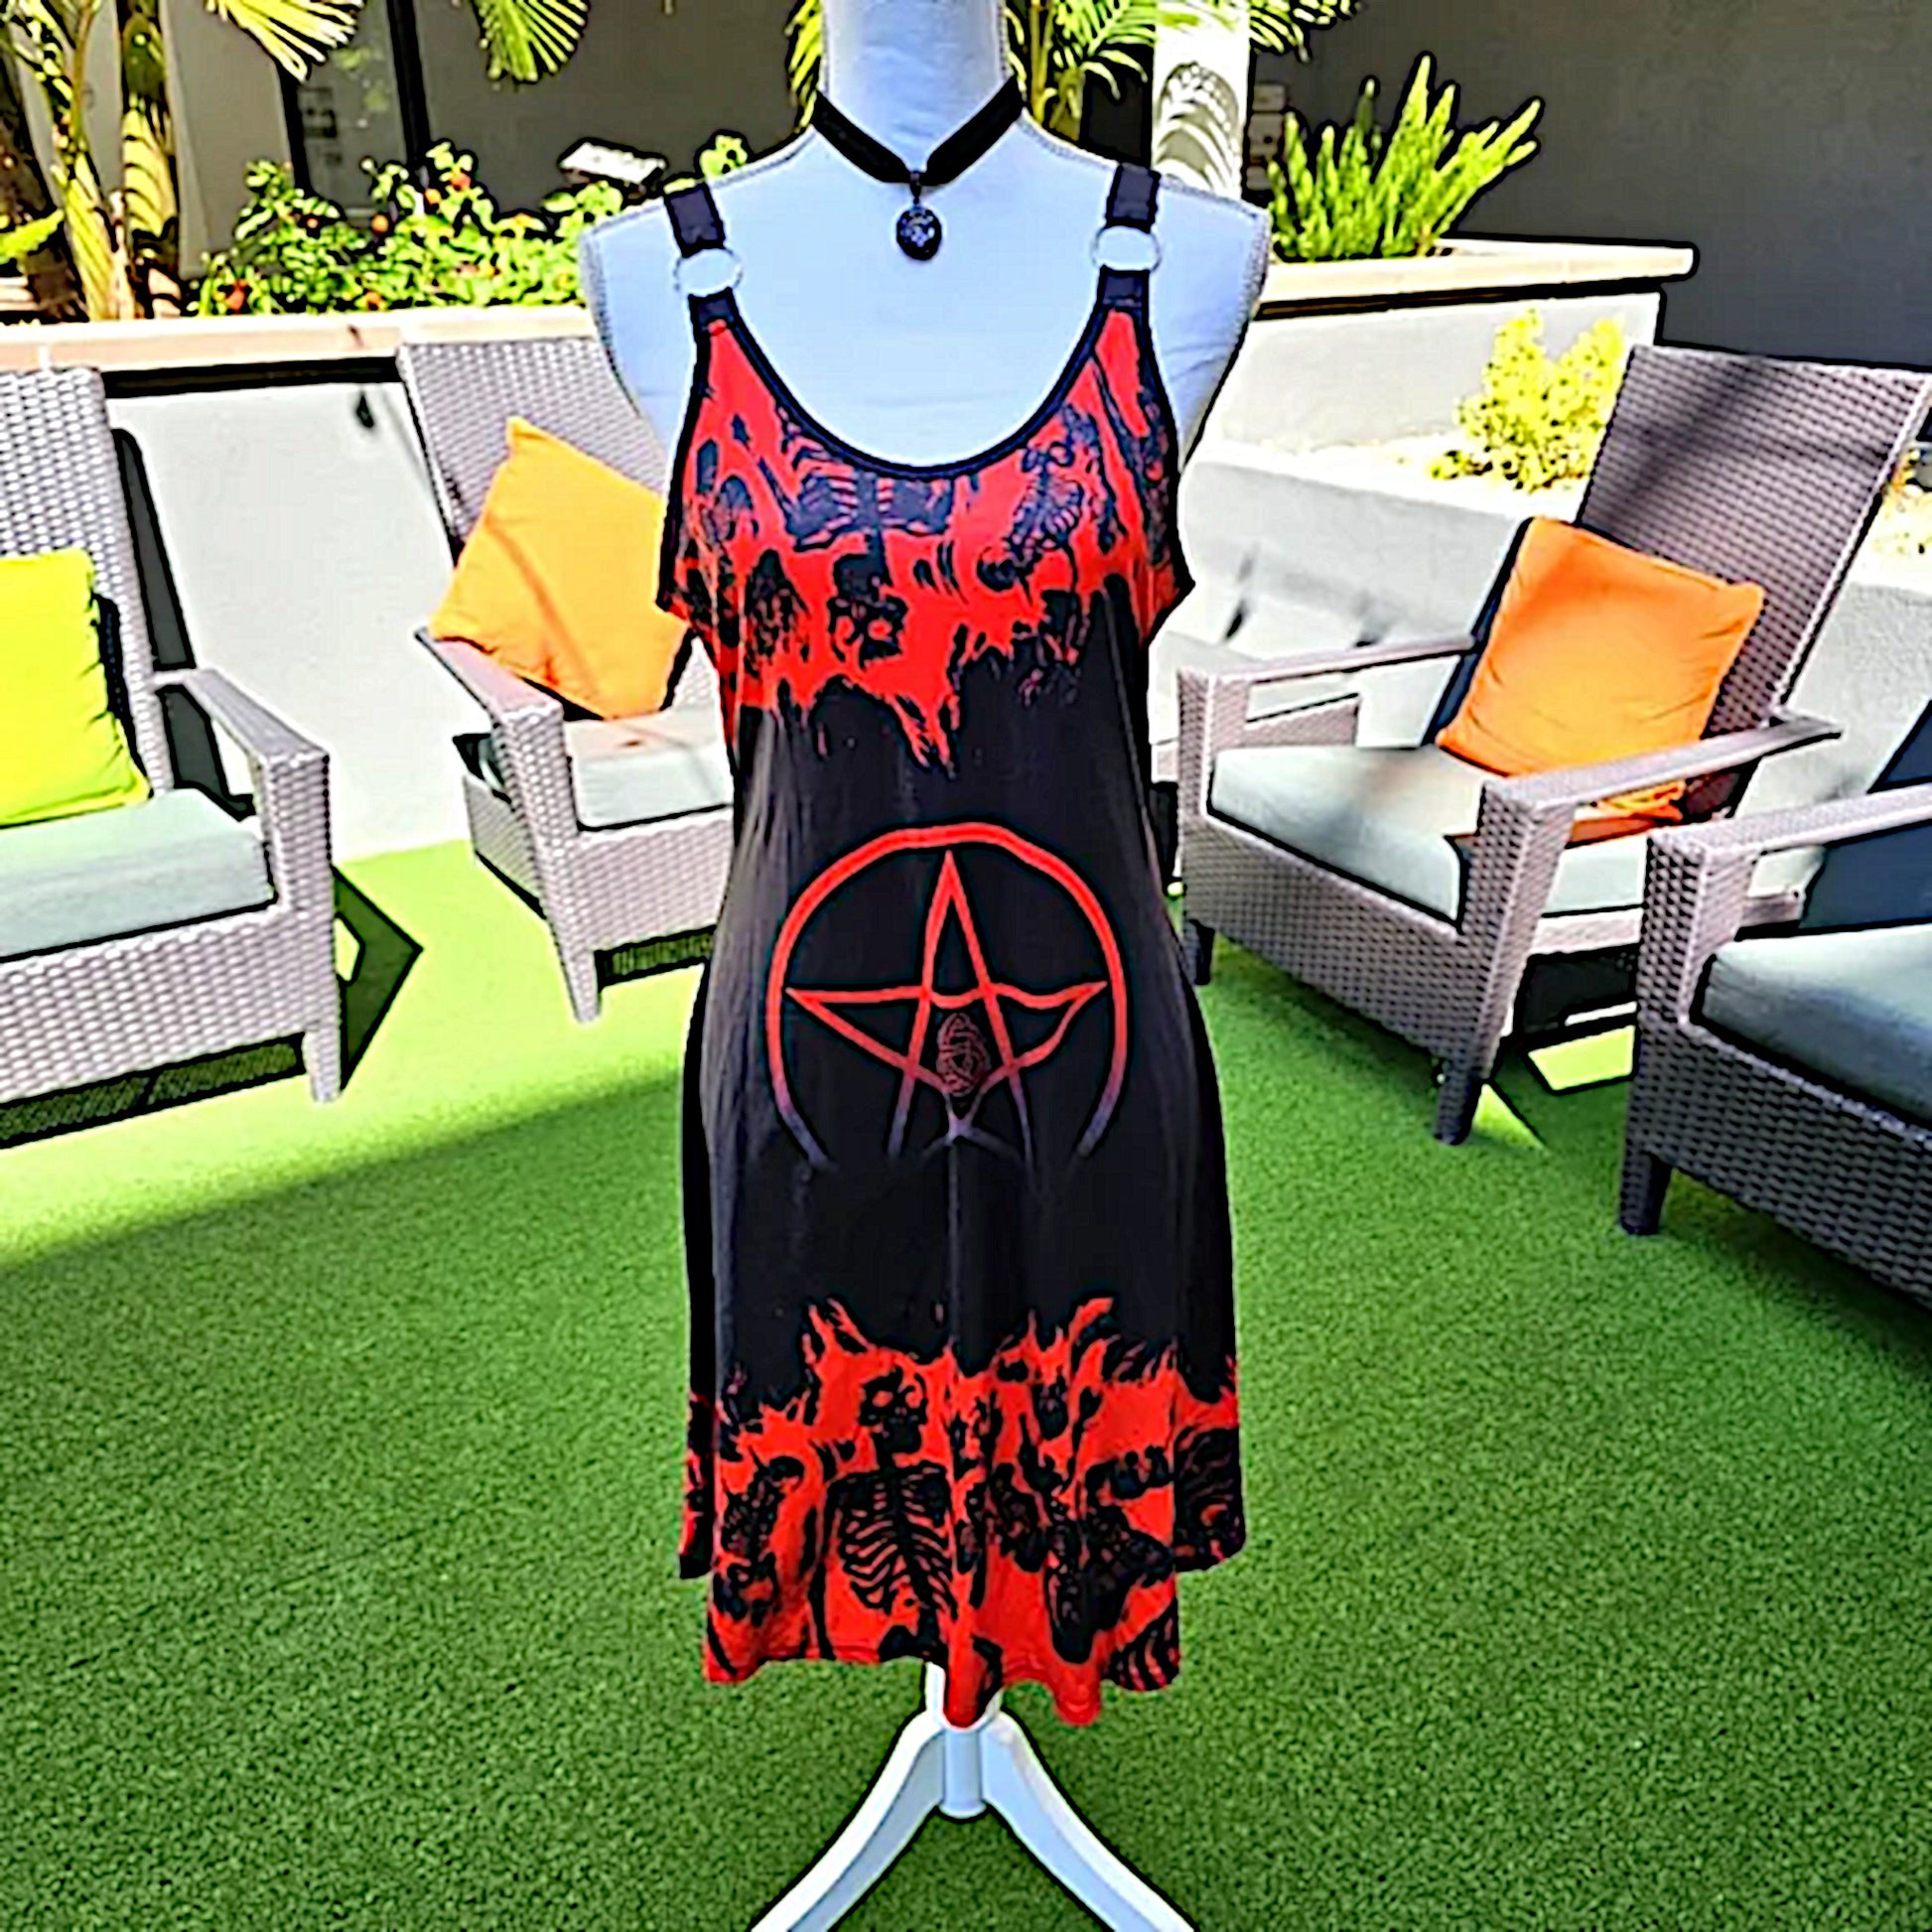 Witchy Gothic A-Line Dress | Red Black Pentacle & Skulls Graphic Design O-Rings - A Gothic Universe - Dresses